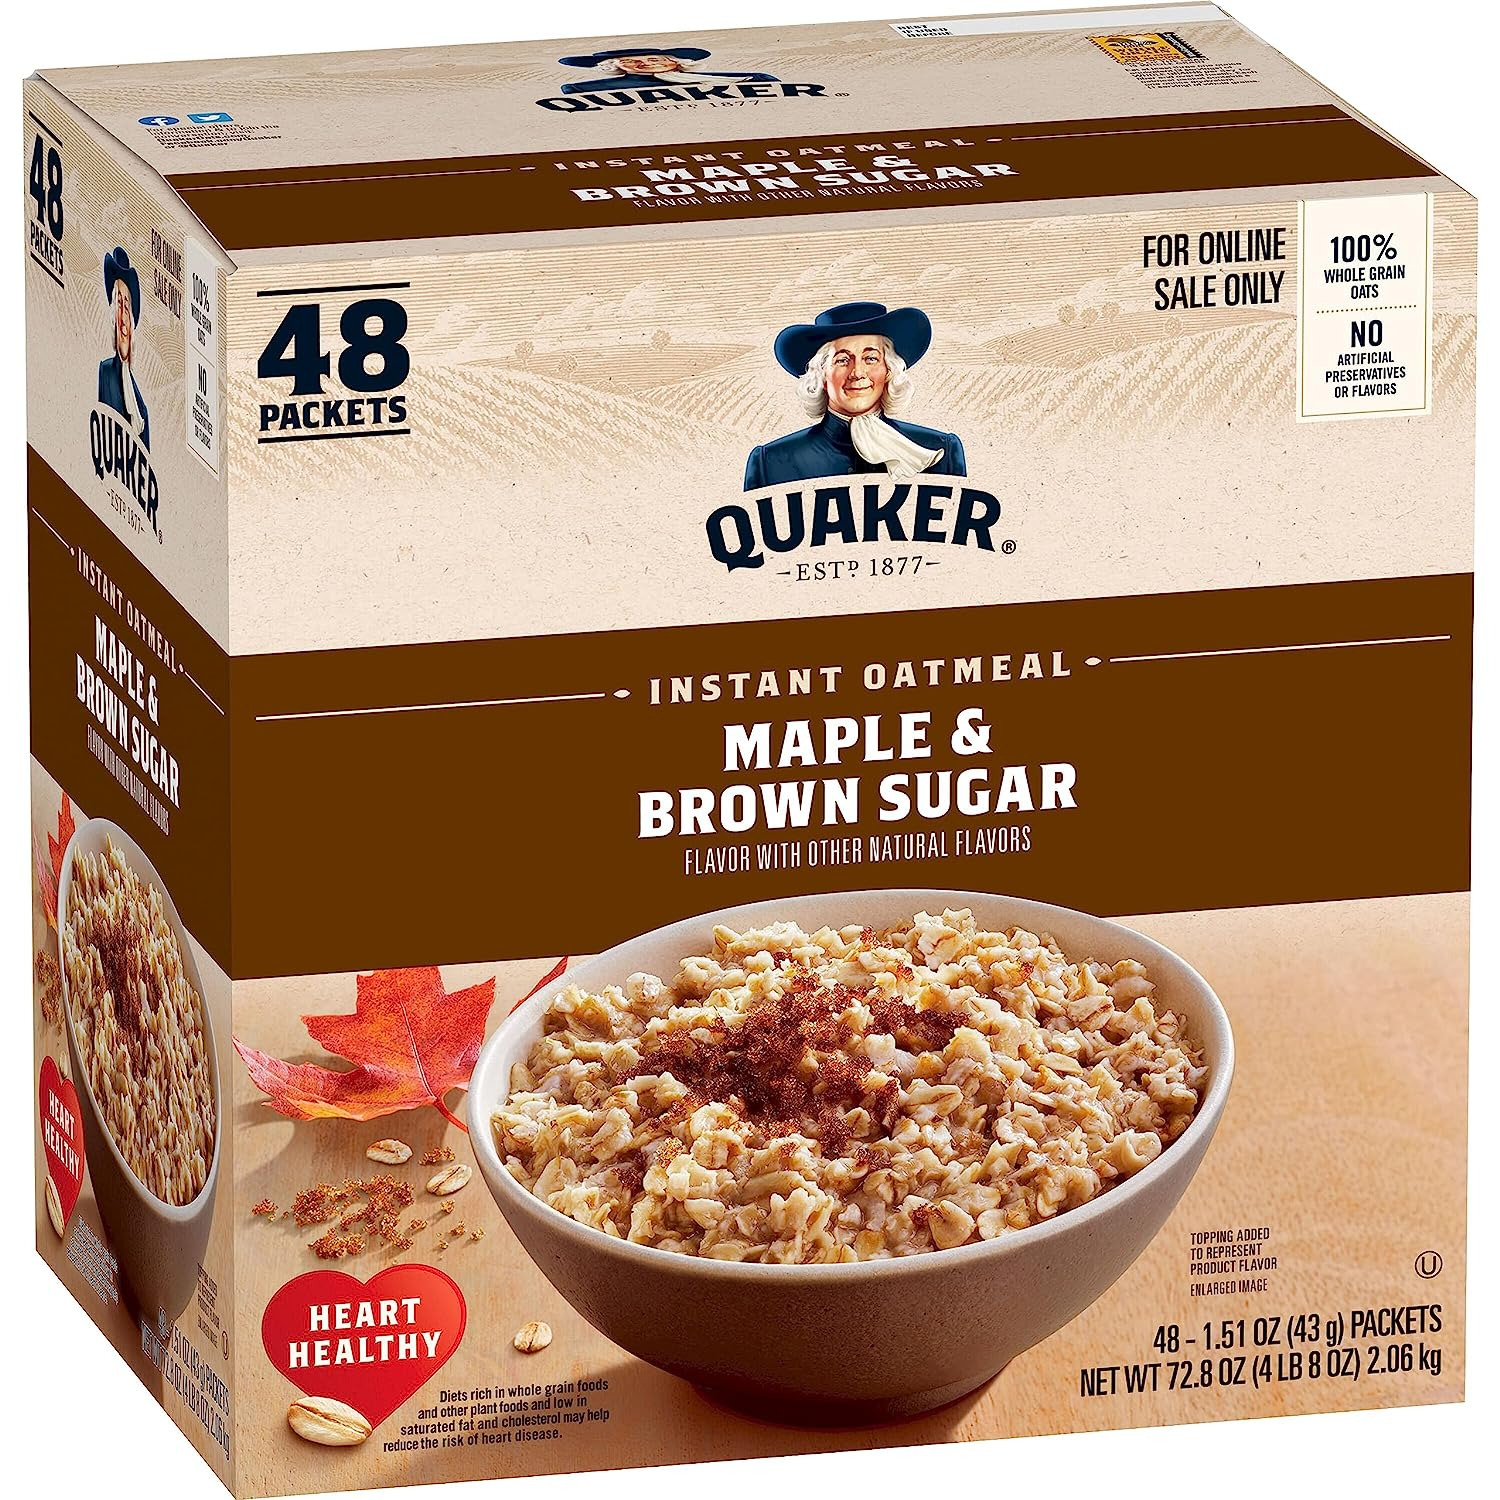 New Quaker Instant Oatmeal, Maple & Brown Sugar, 1.51 Ounce (Pack of 48)